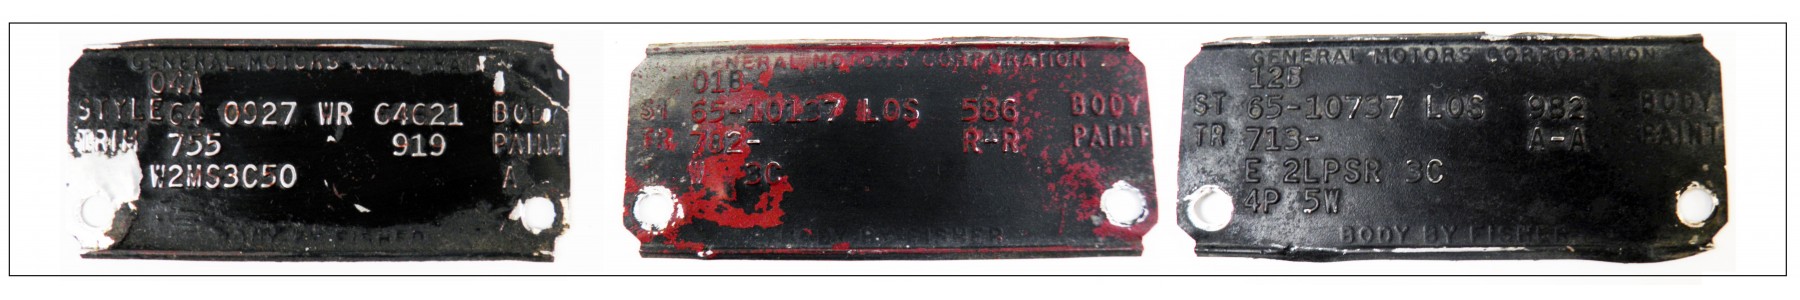 USED 1962 BODY TAGS